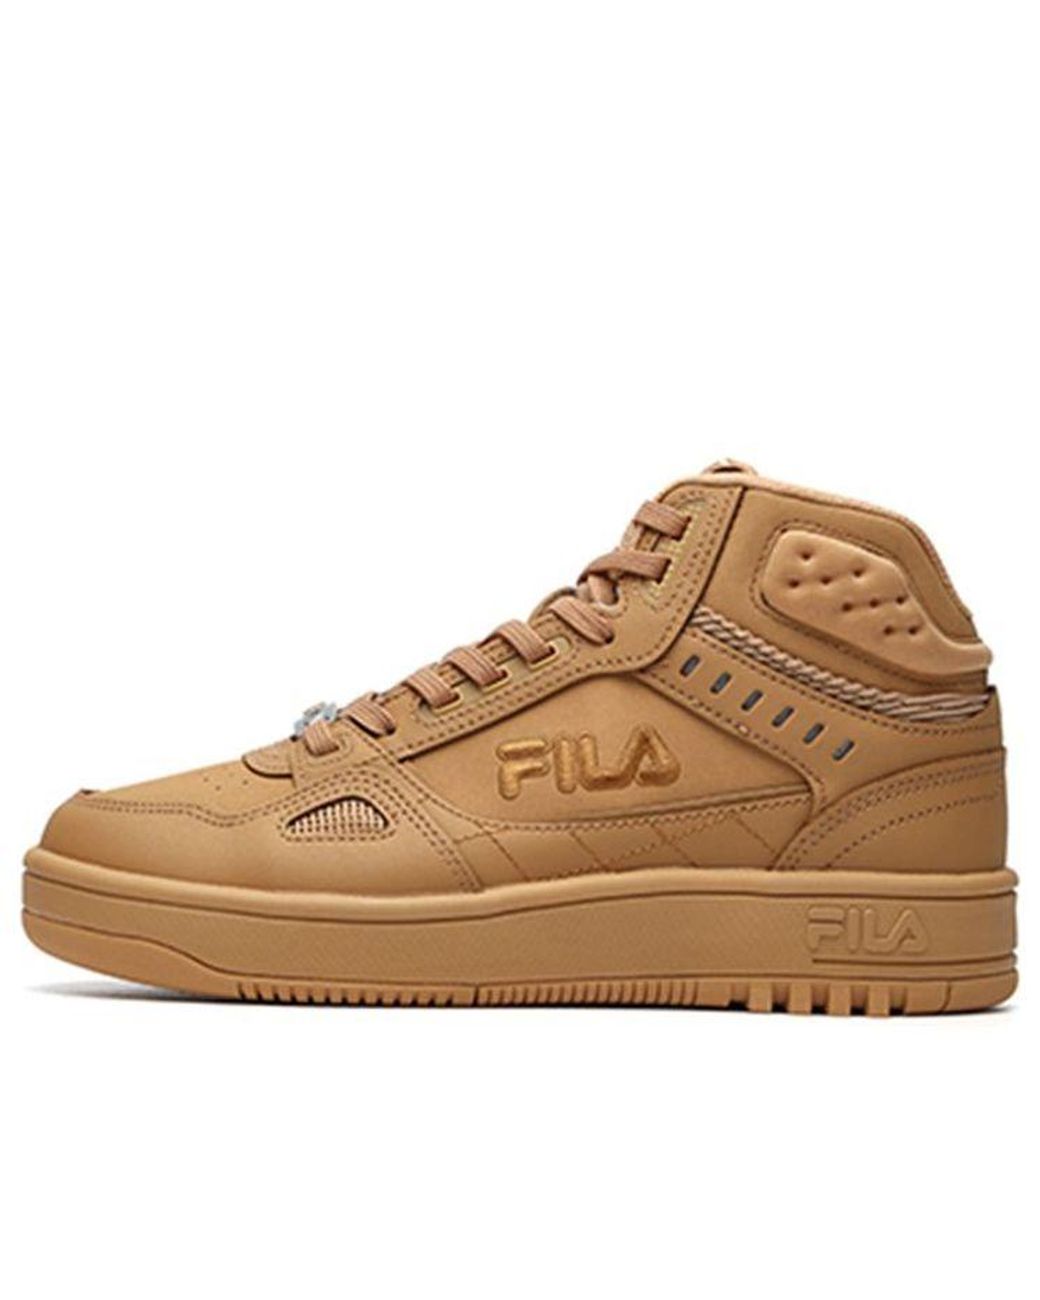 Fila High Top Retro Basketball Shoes Clay in Brown | Lyst